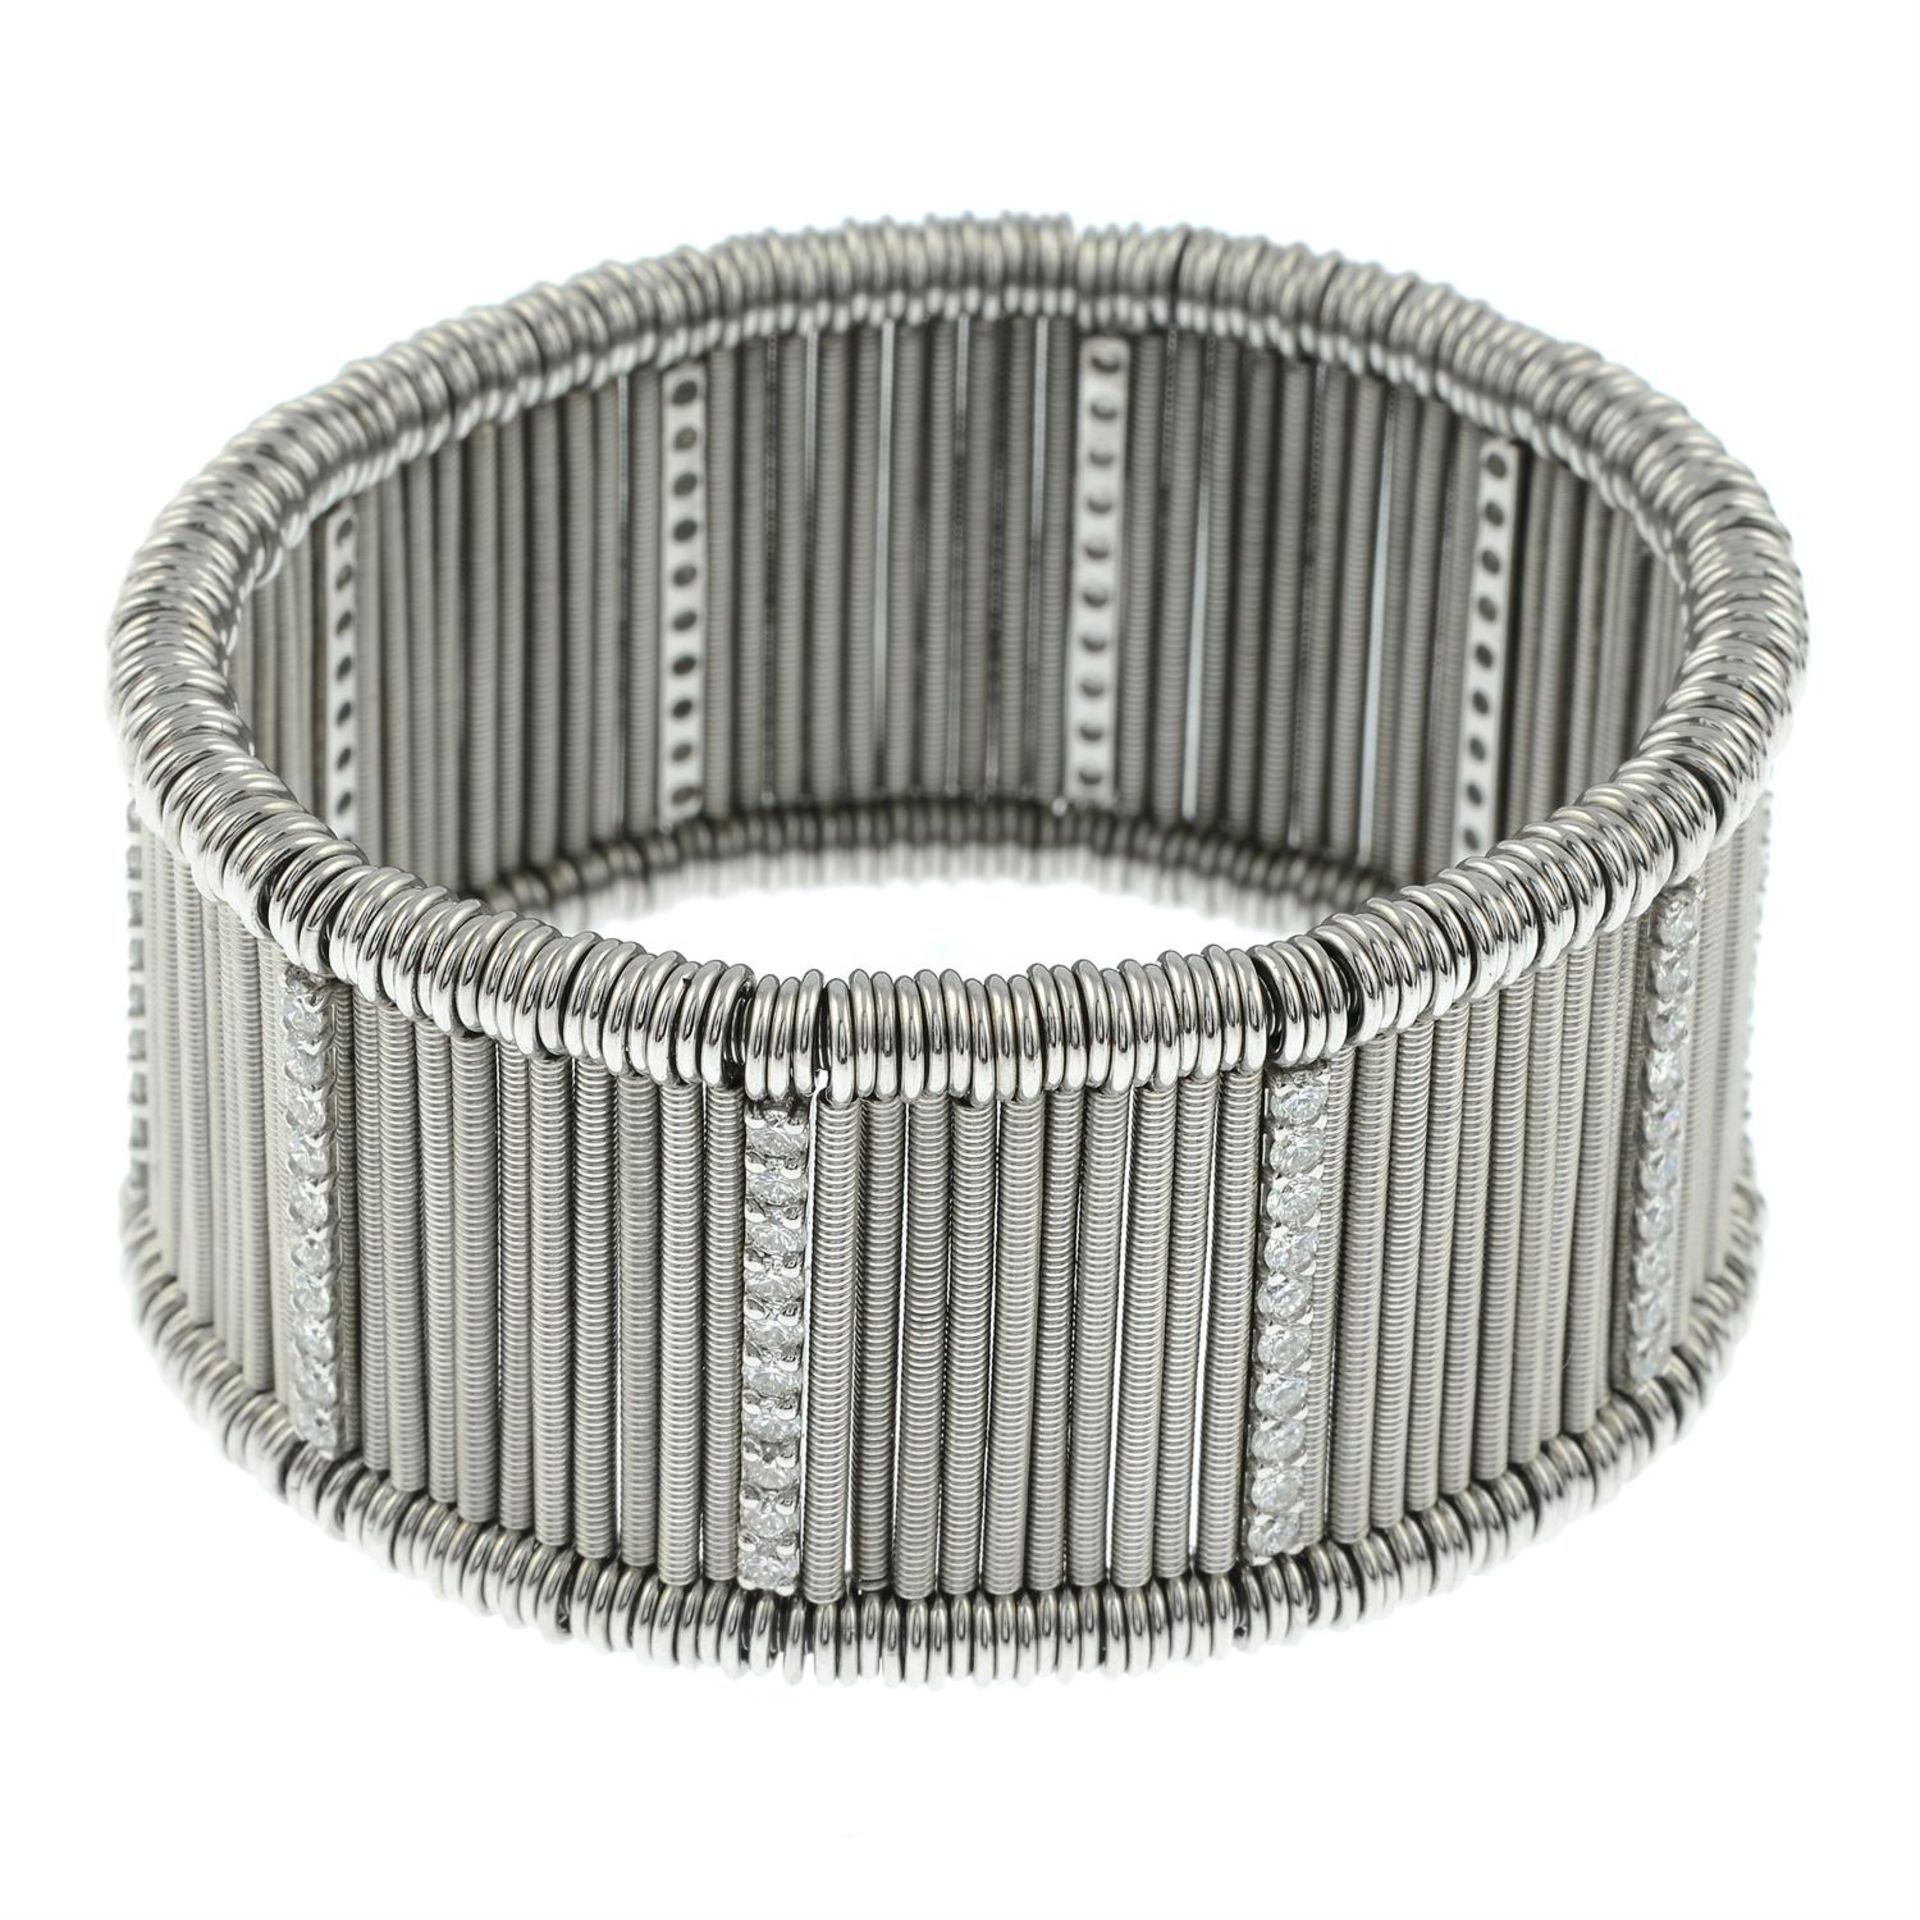 An 18ct gold, stainless steel and brilliant-cut diamond 'Shanghai' bracelet cuff, by Jarretiere. - Image 2 of 4